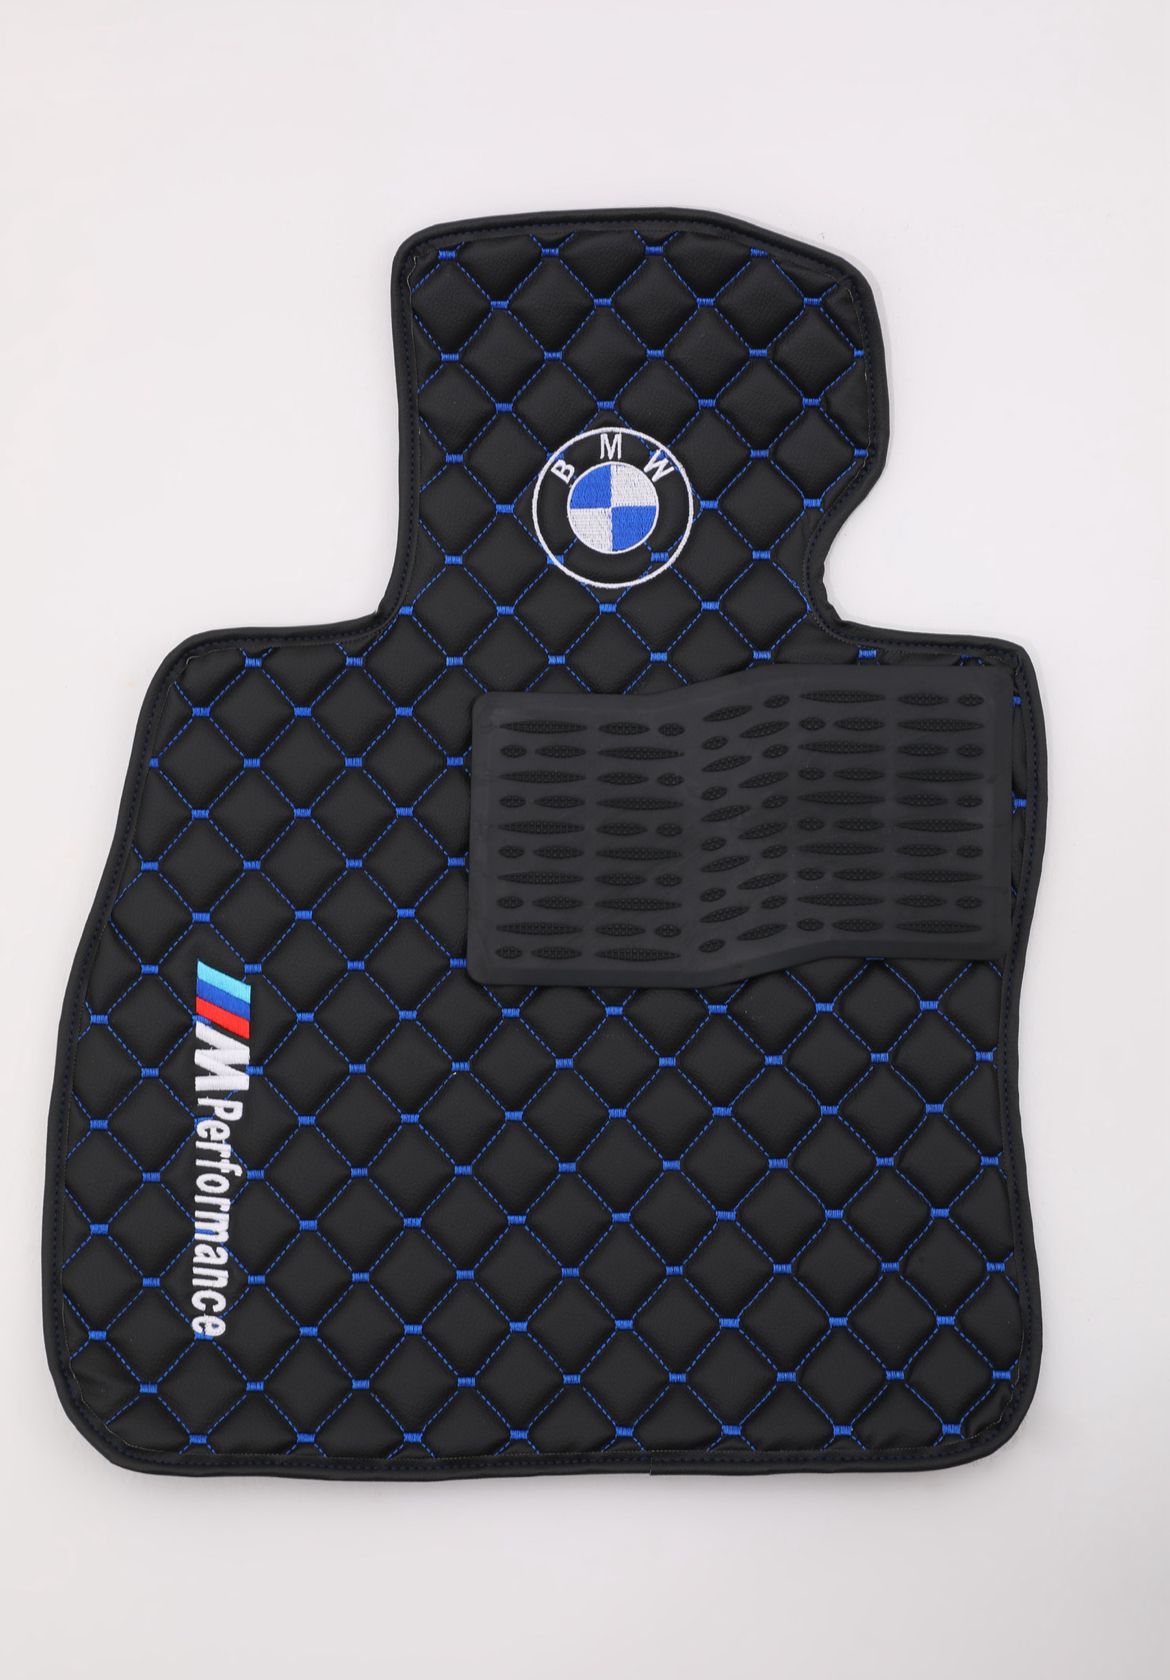 For all BMW E36 M Performance Luxury Leather Custom Car Mat 4x